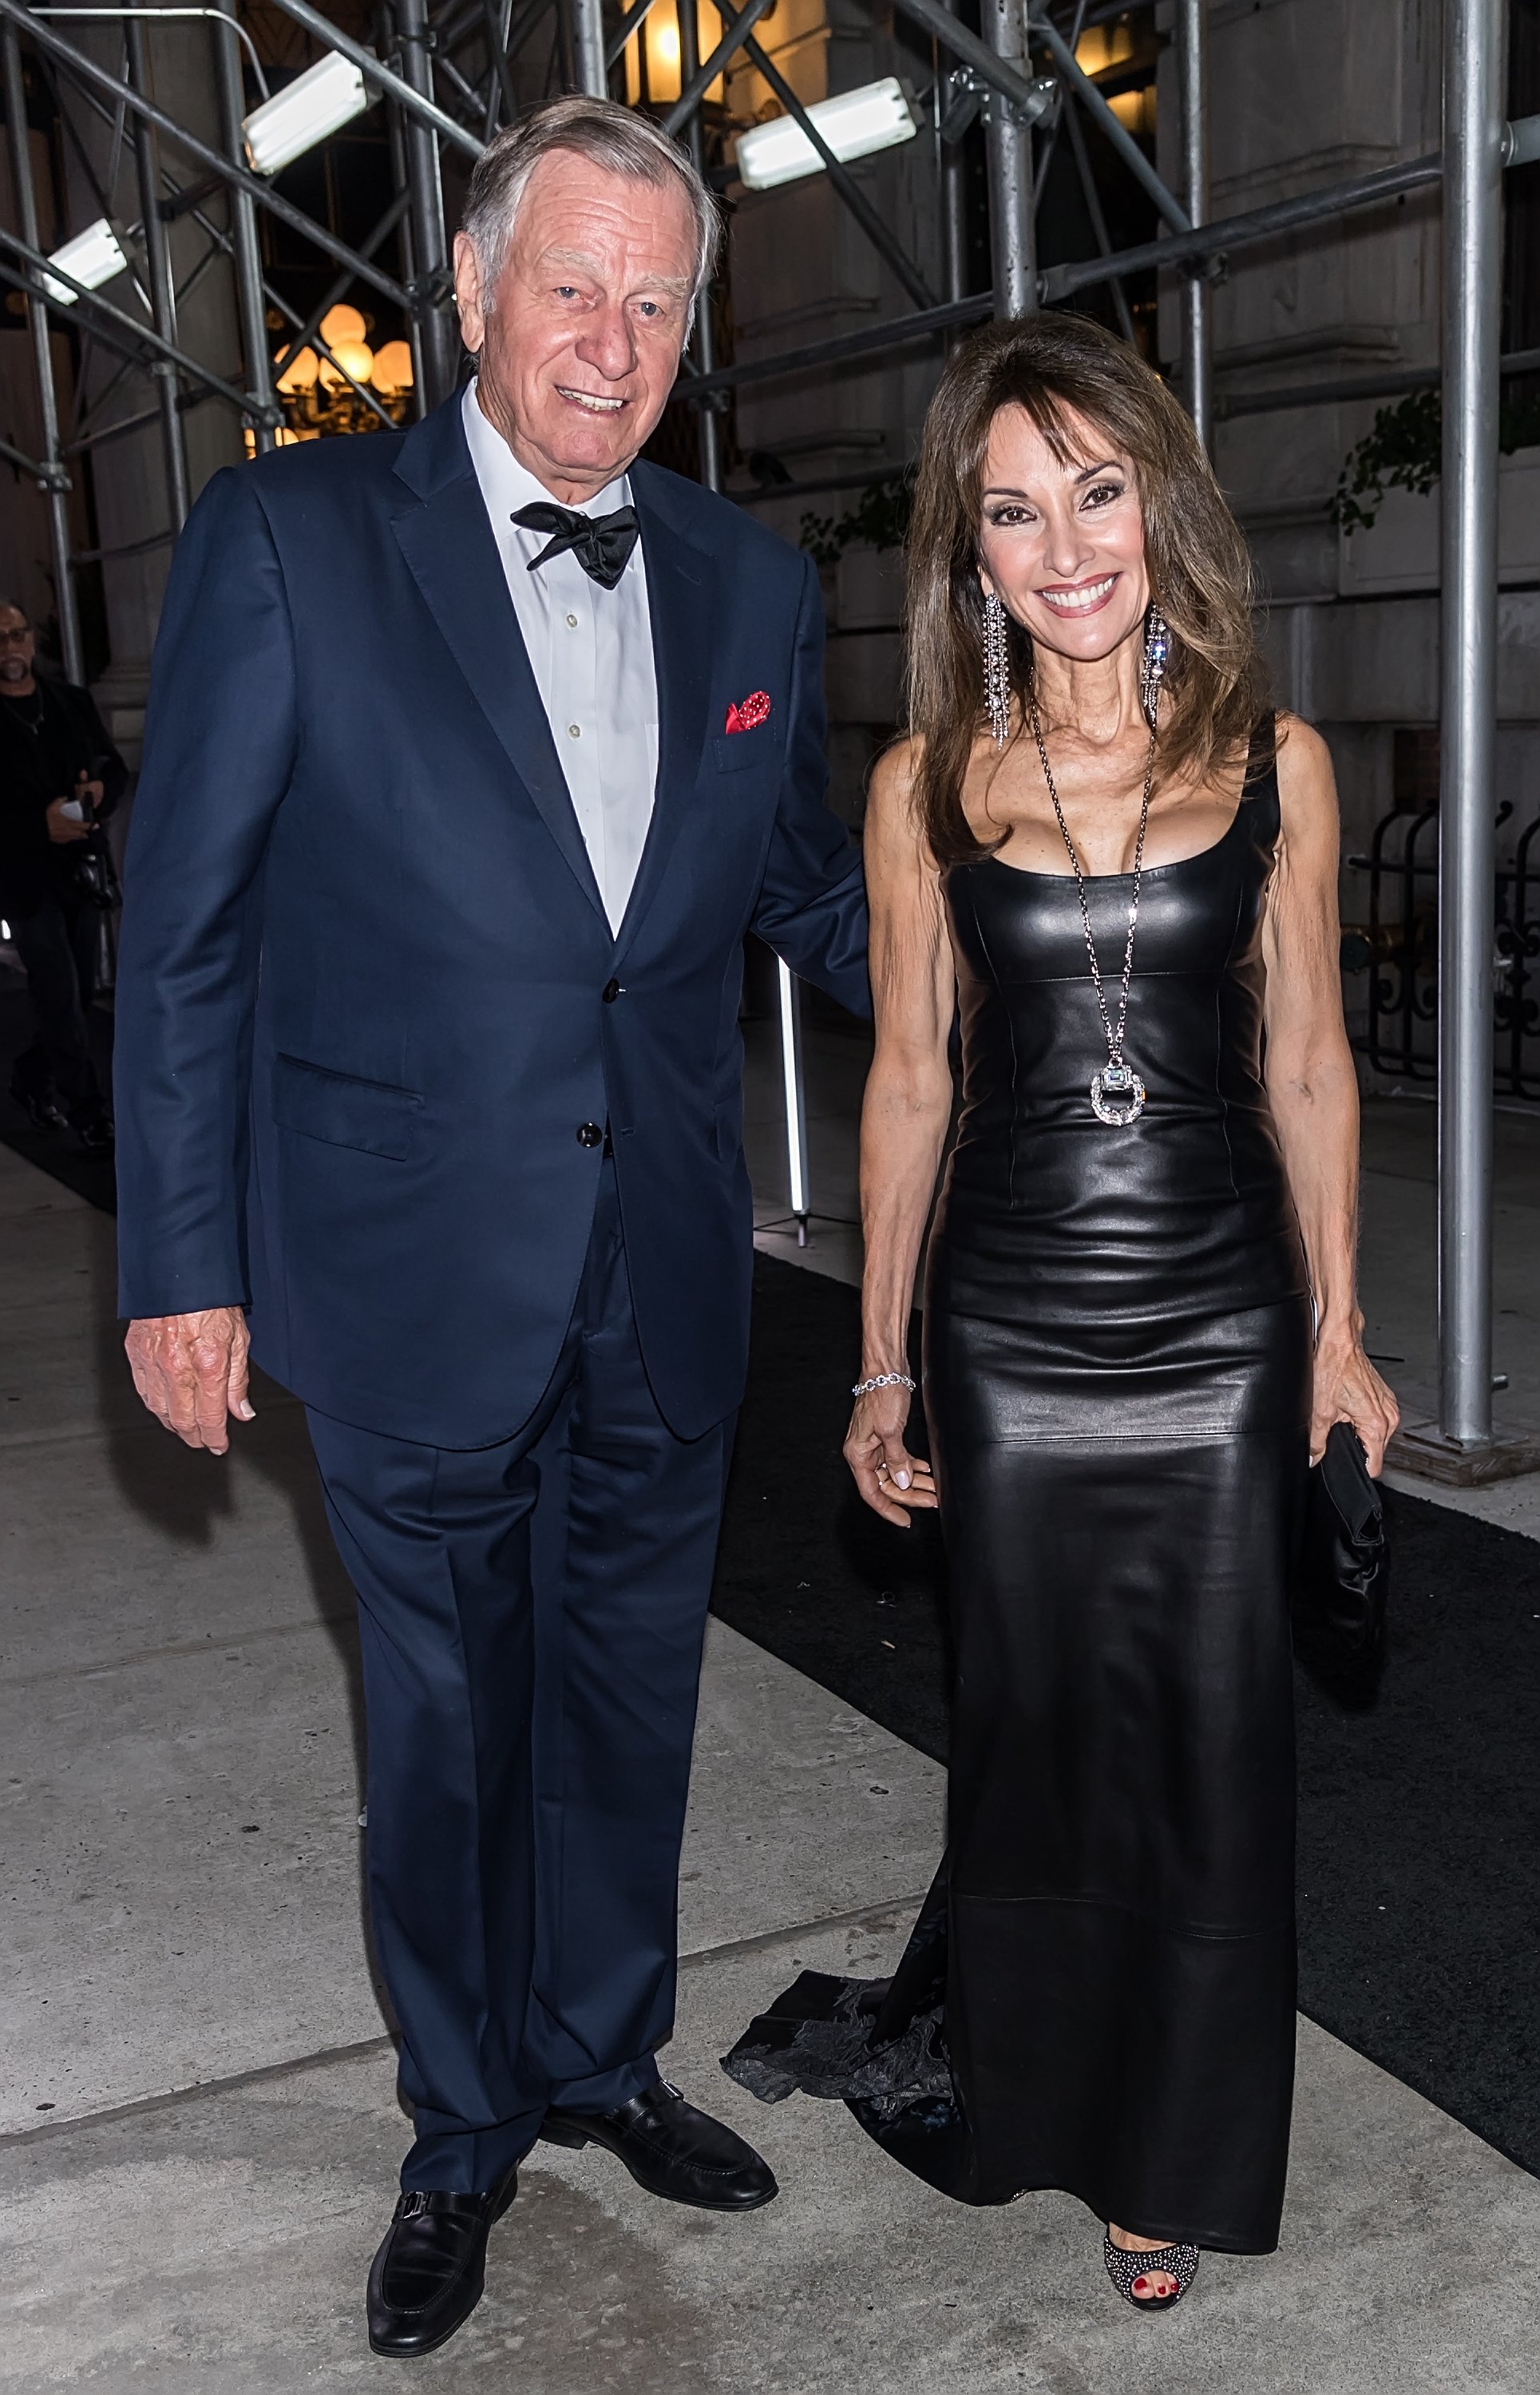 Helmut Huber and actress Susan Lucci are seen leaving the Harper's BAZAAR ICONS Party at The Plaza Hotel on September 7, 2018 in New York City | Source: Getty Images